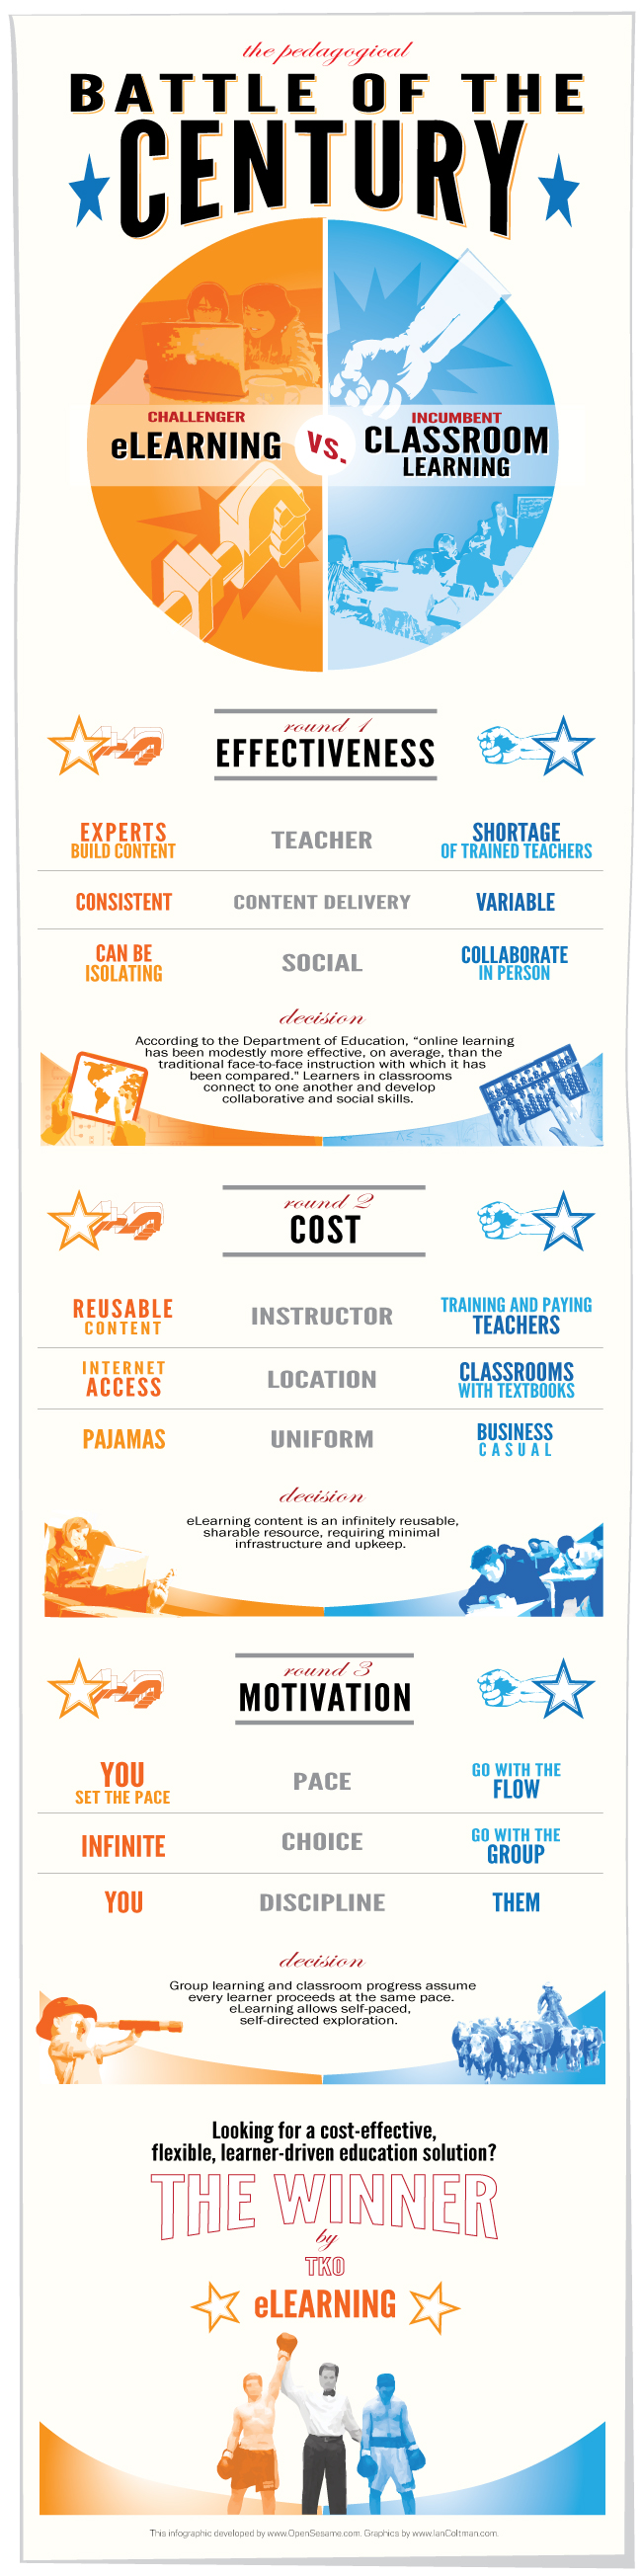 Traditional Classroom vs Online Learning